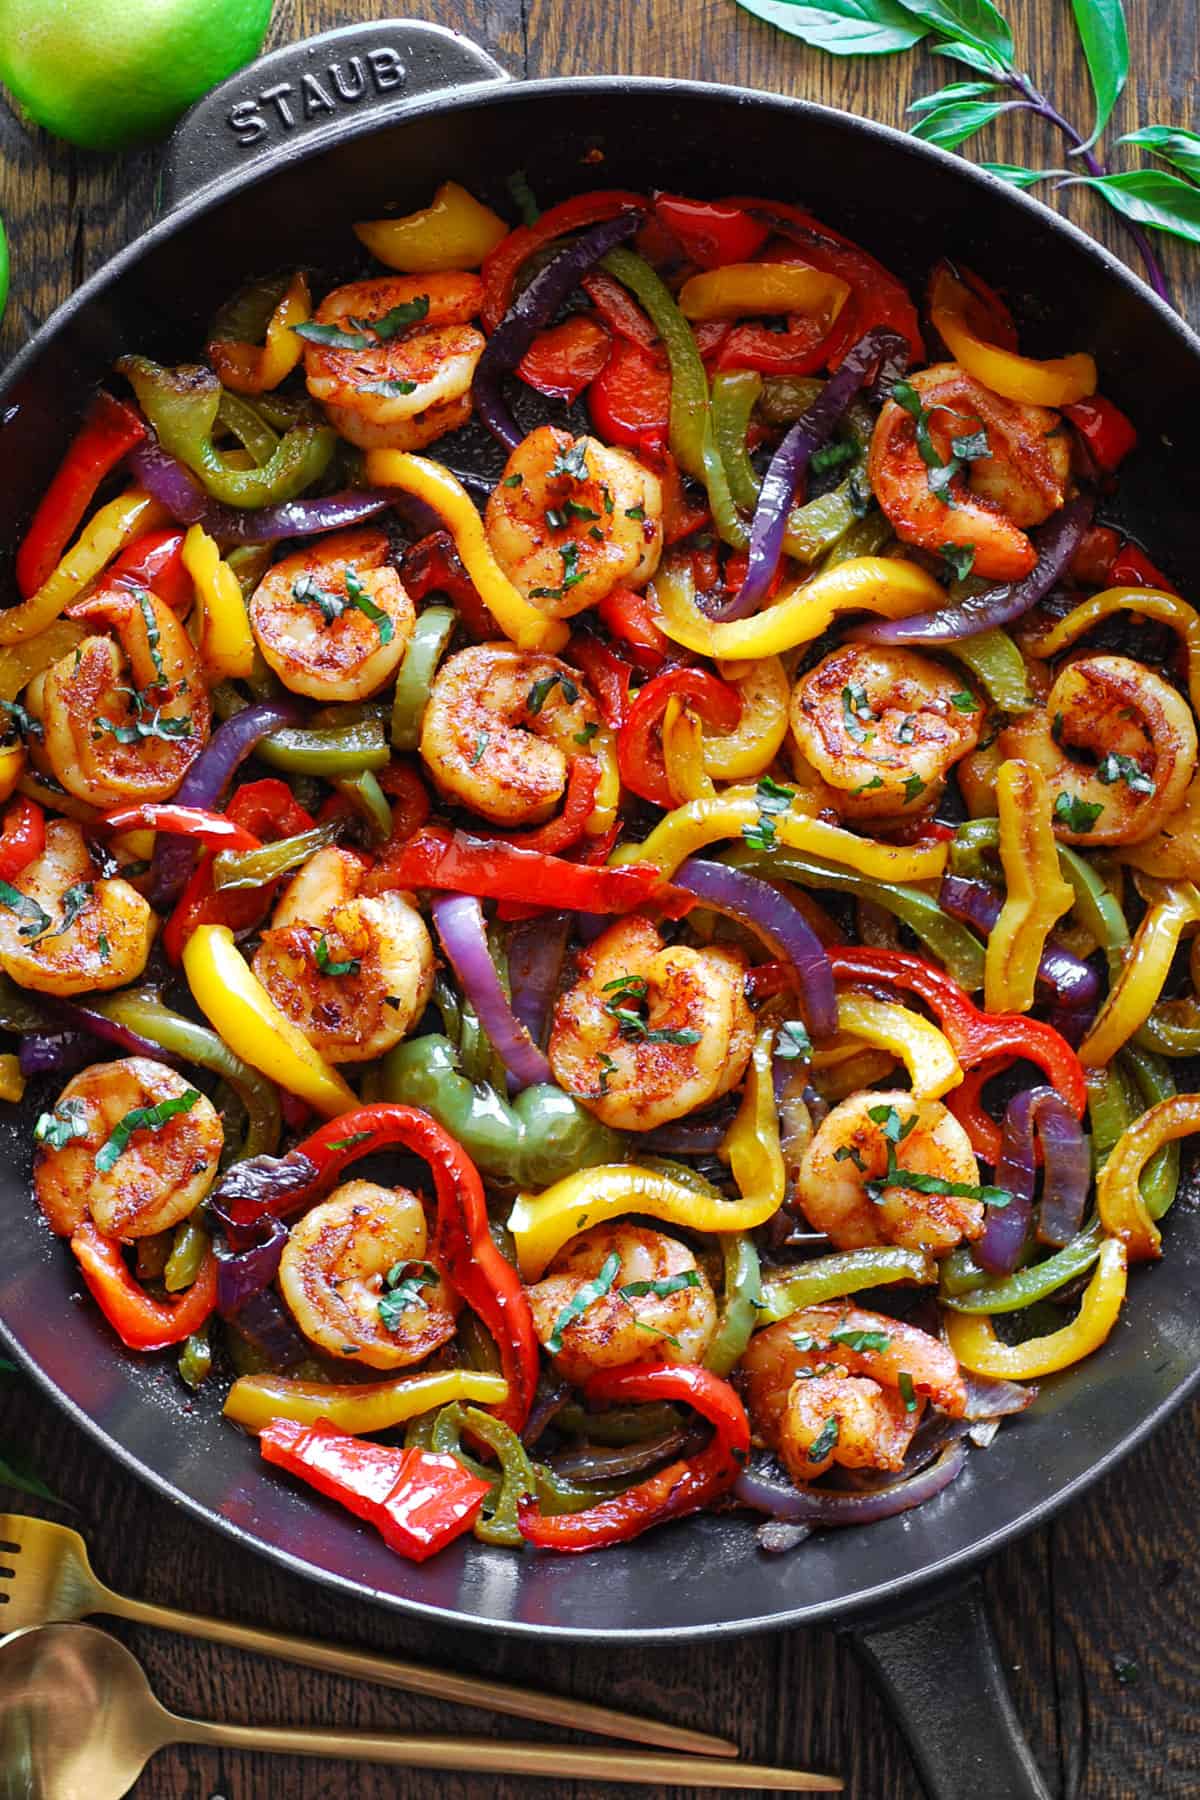 shrimp fajiitas with bell peppers and onions - in a cast iron skillet.